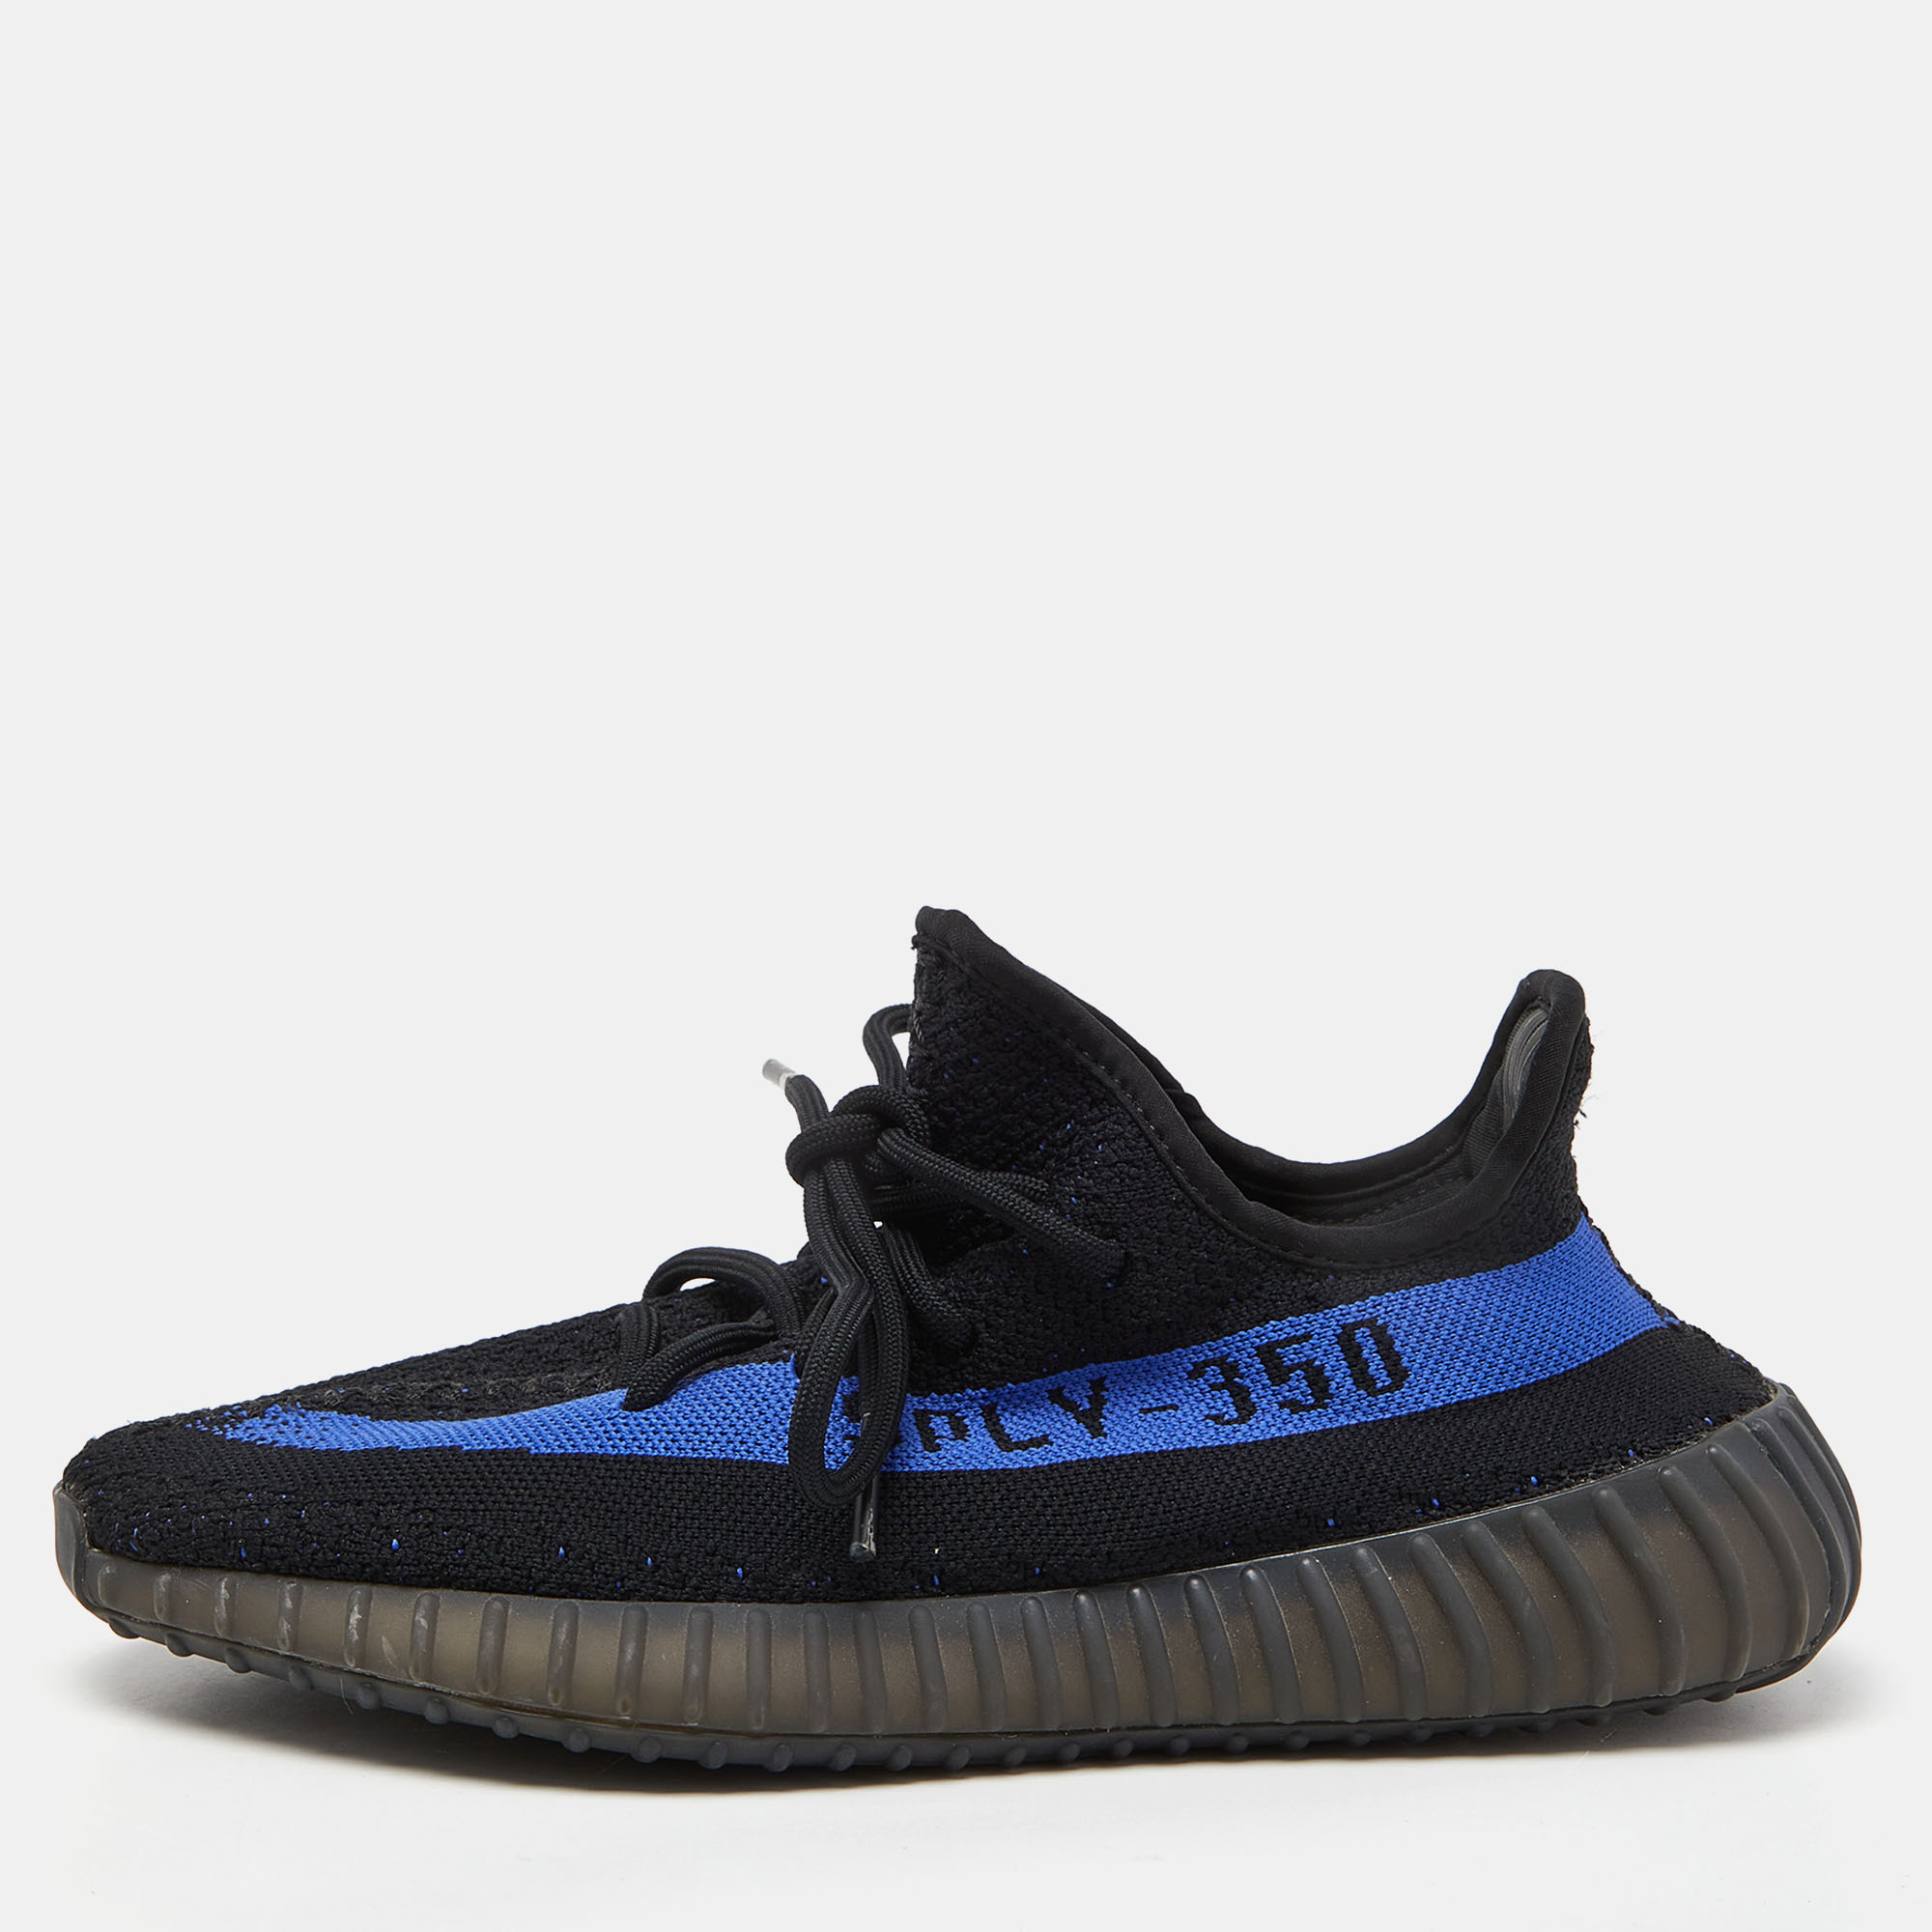 Pre-owned Yeezy X Adidas Black/blue Knit Fabric Boost 350 V2 Dazzling Blue Trainers Size 40 1/3